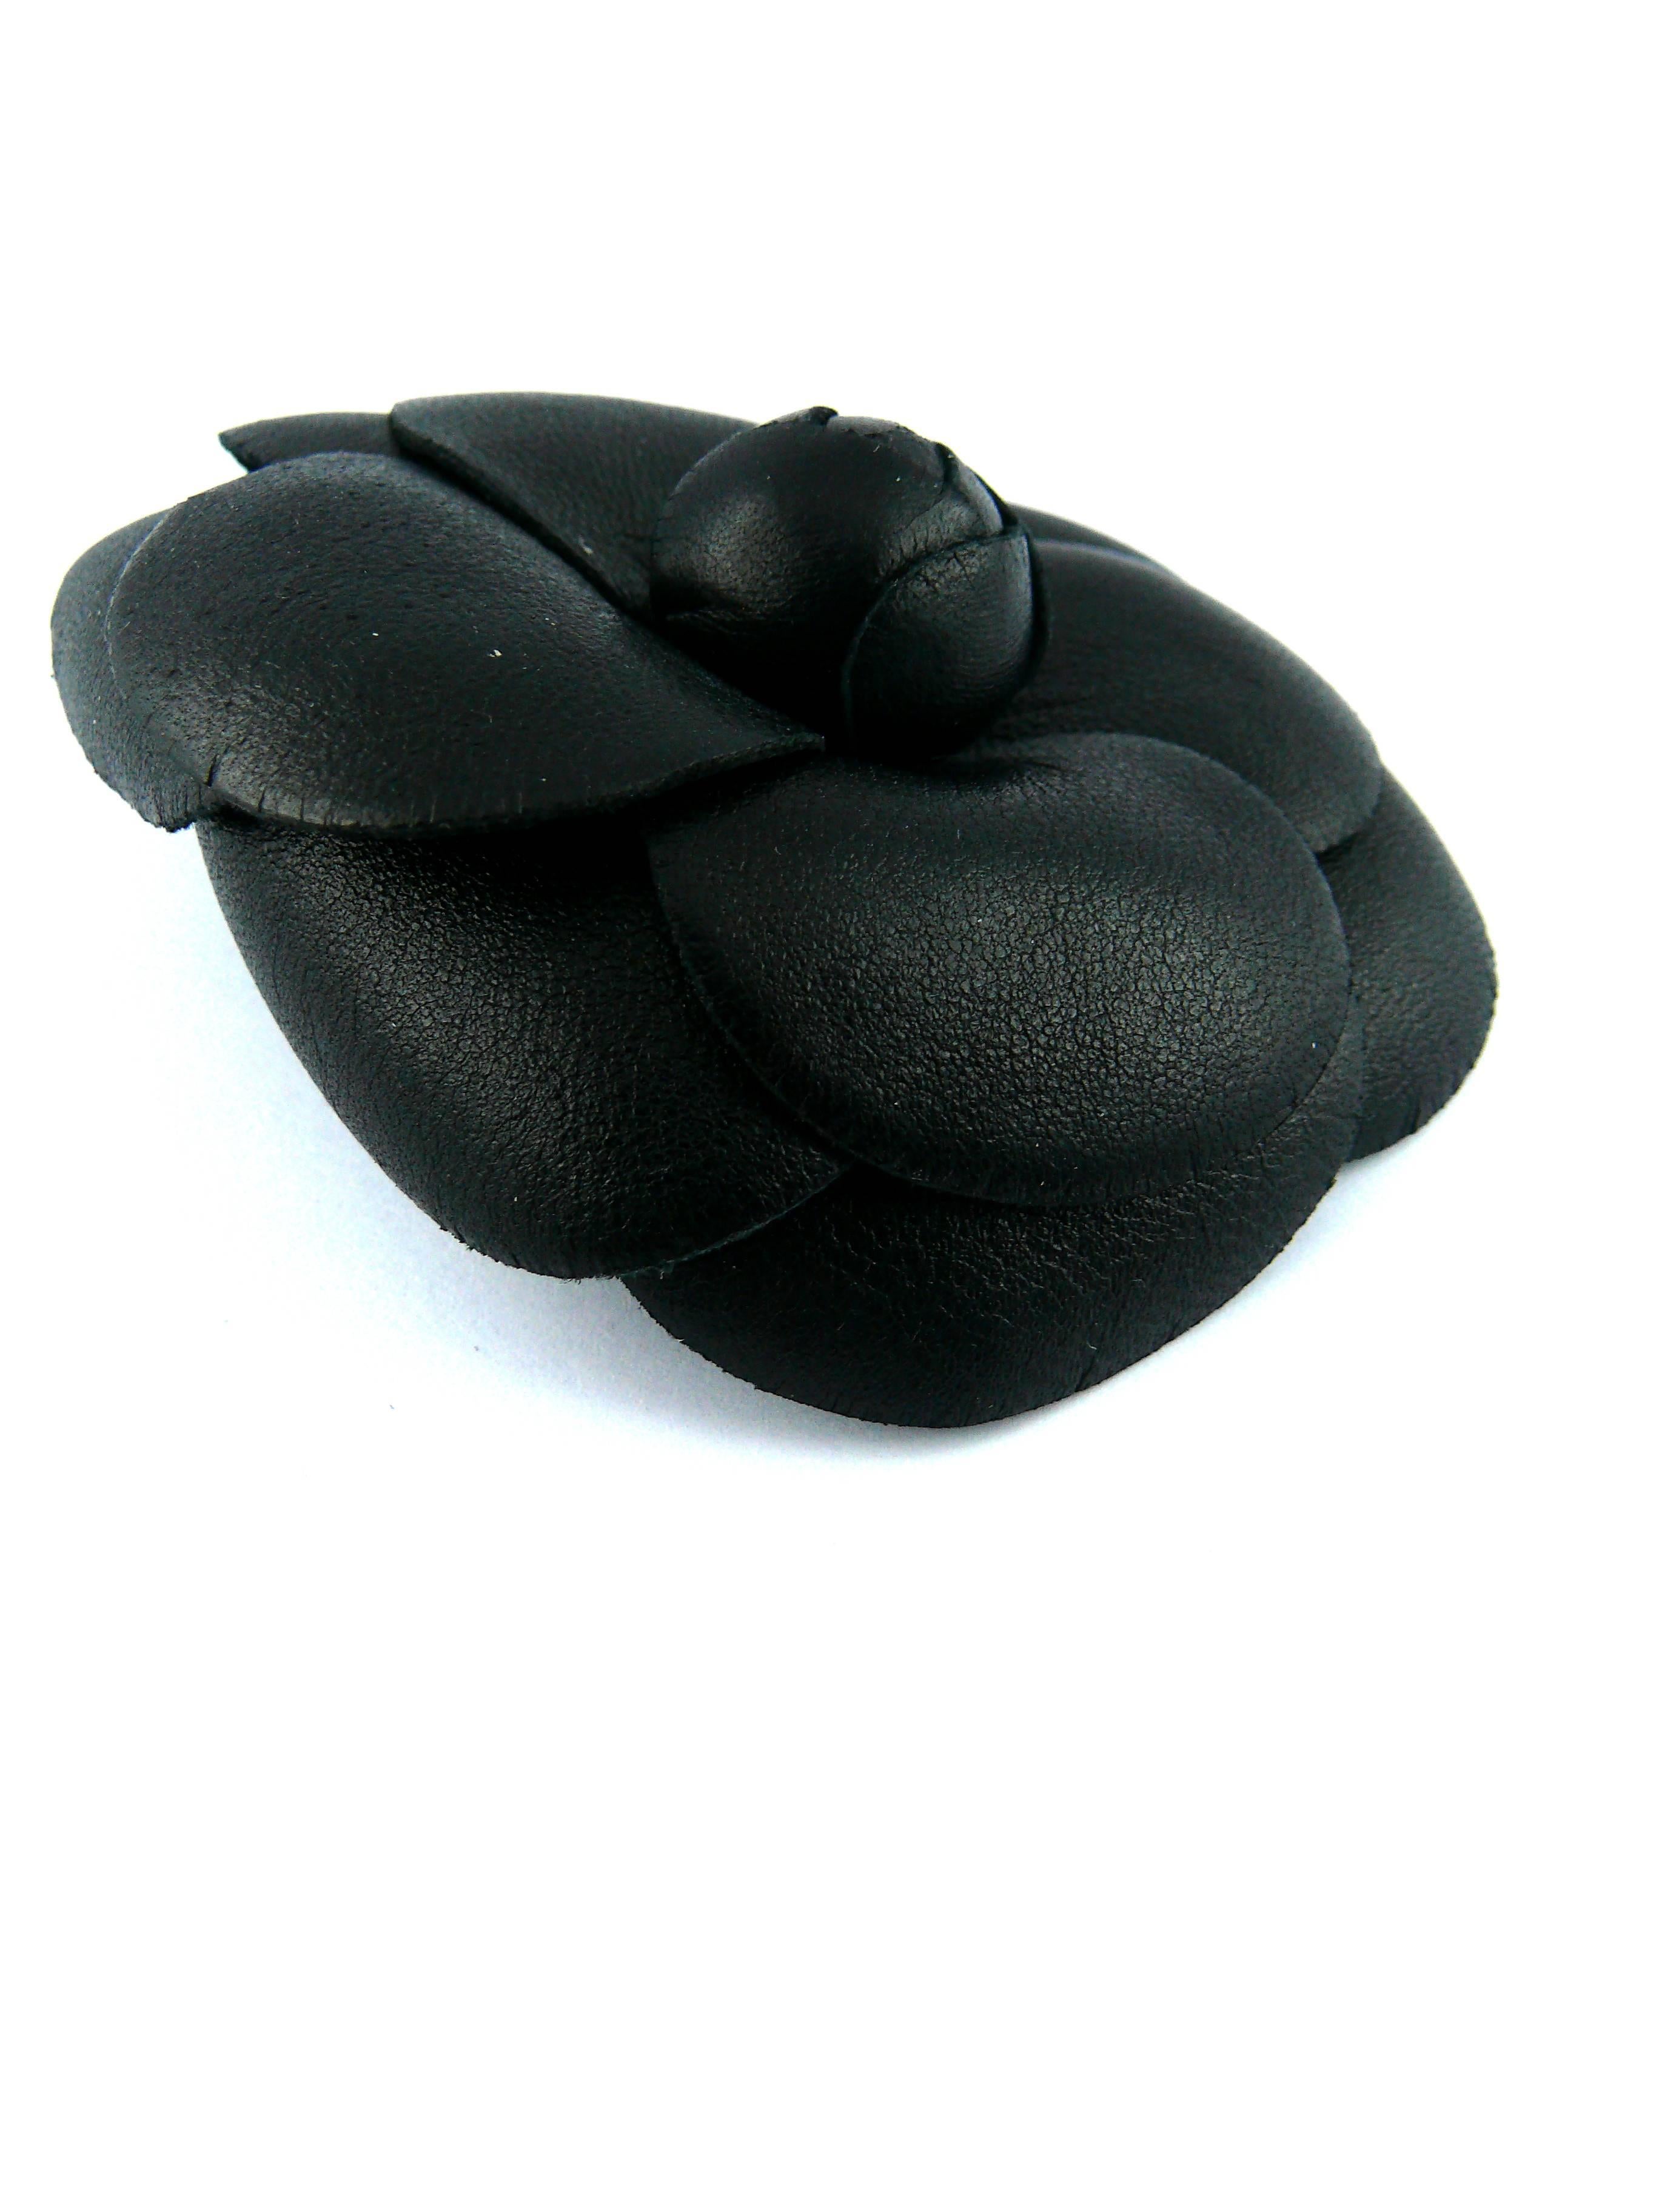 CHANEL classic black leather camellia brooch.

Marked CHANEL Made in France.

JEWELRY CONDITION CHART
- New or never worn : item is in pristine condition with no noticeable imperfections
- Excellent : item has been used and may have not more than